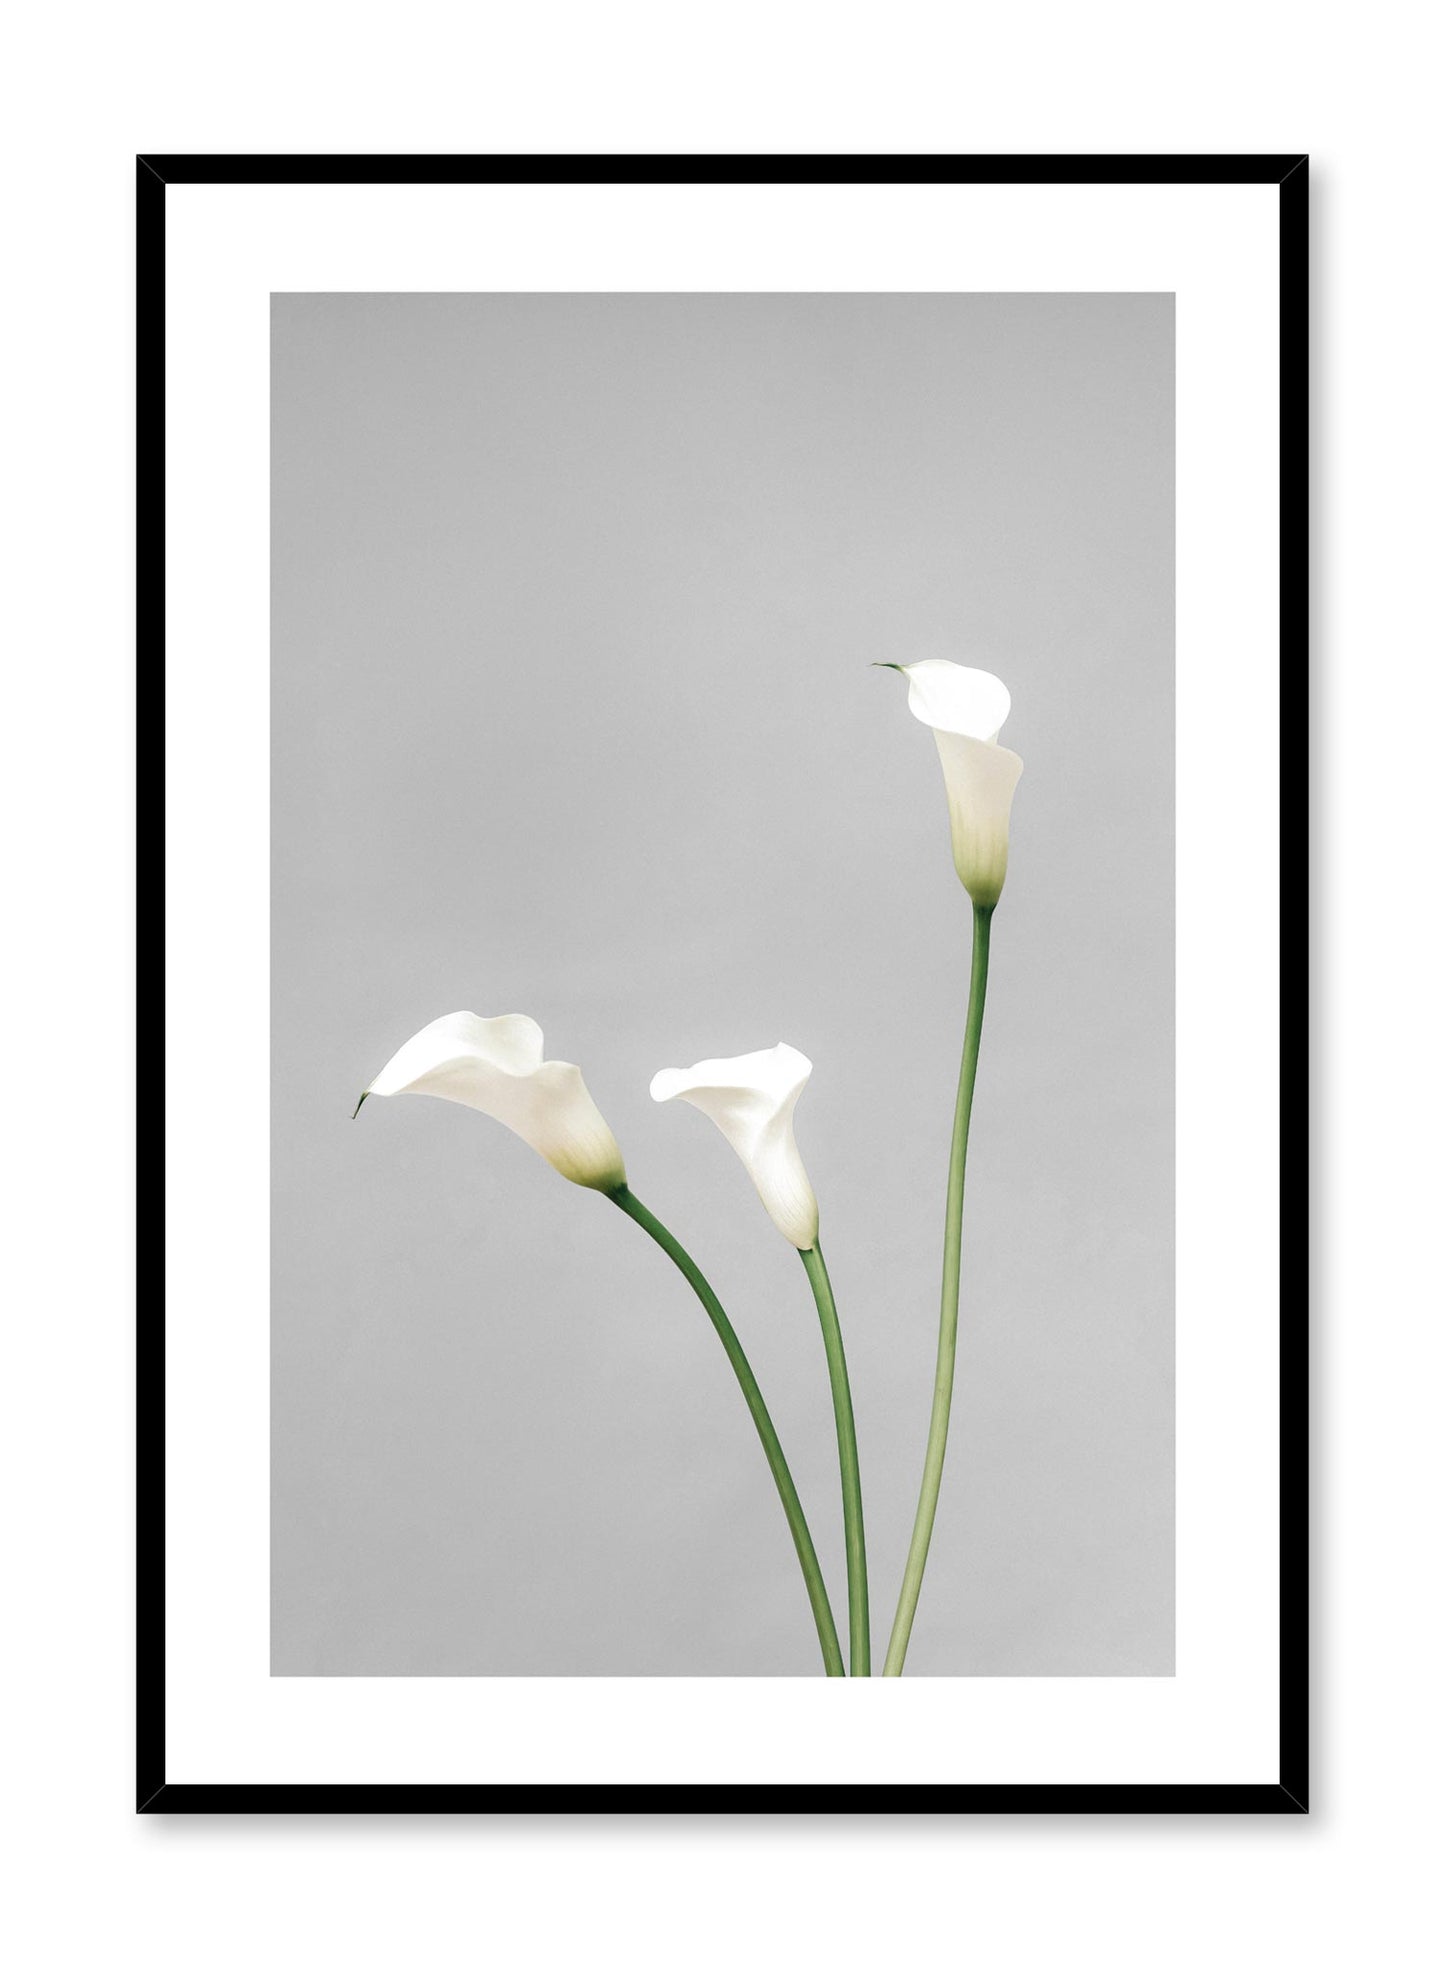 Minimalistic wall poster by Opposite Wall with white Calla Lily flower photography